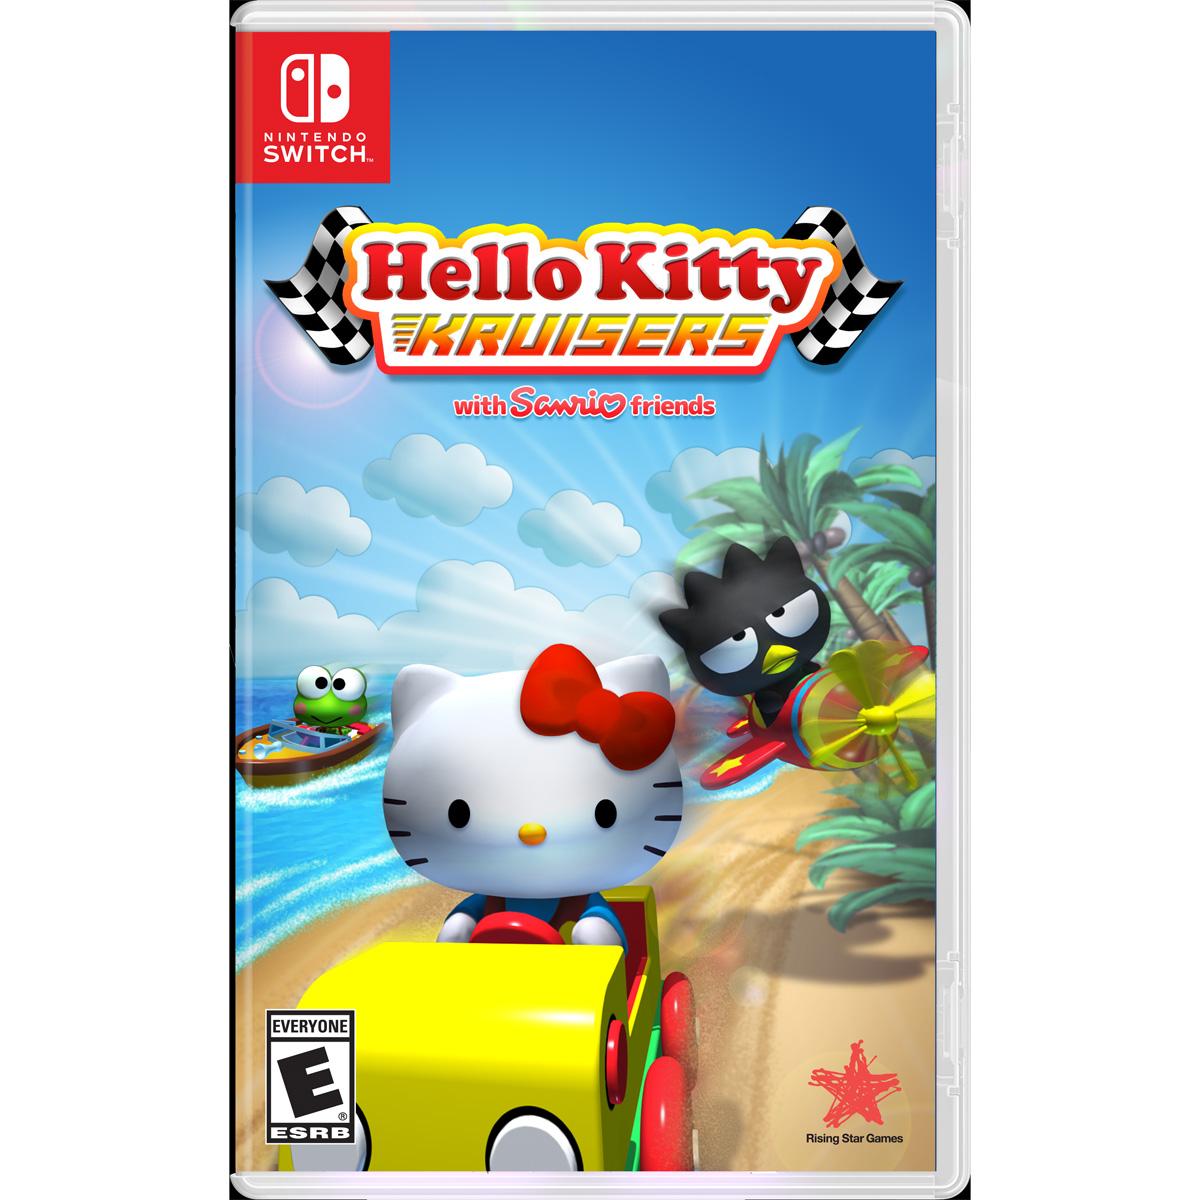 Hello Kitty Kruisers With Sanrio Friends Nintendo Switch for $1.99